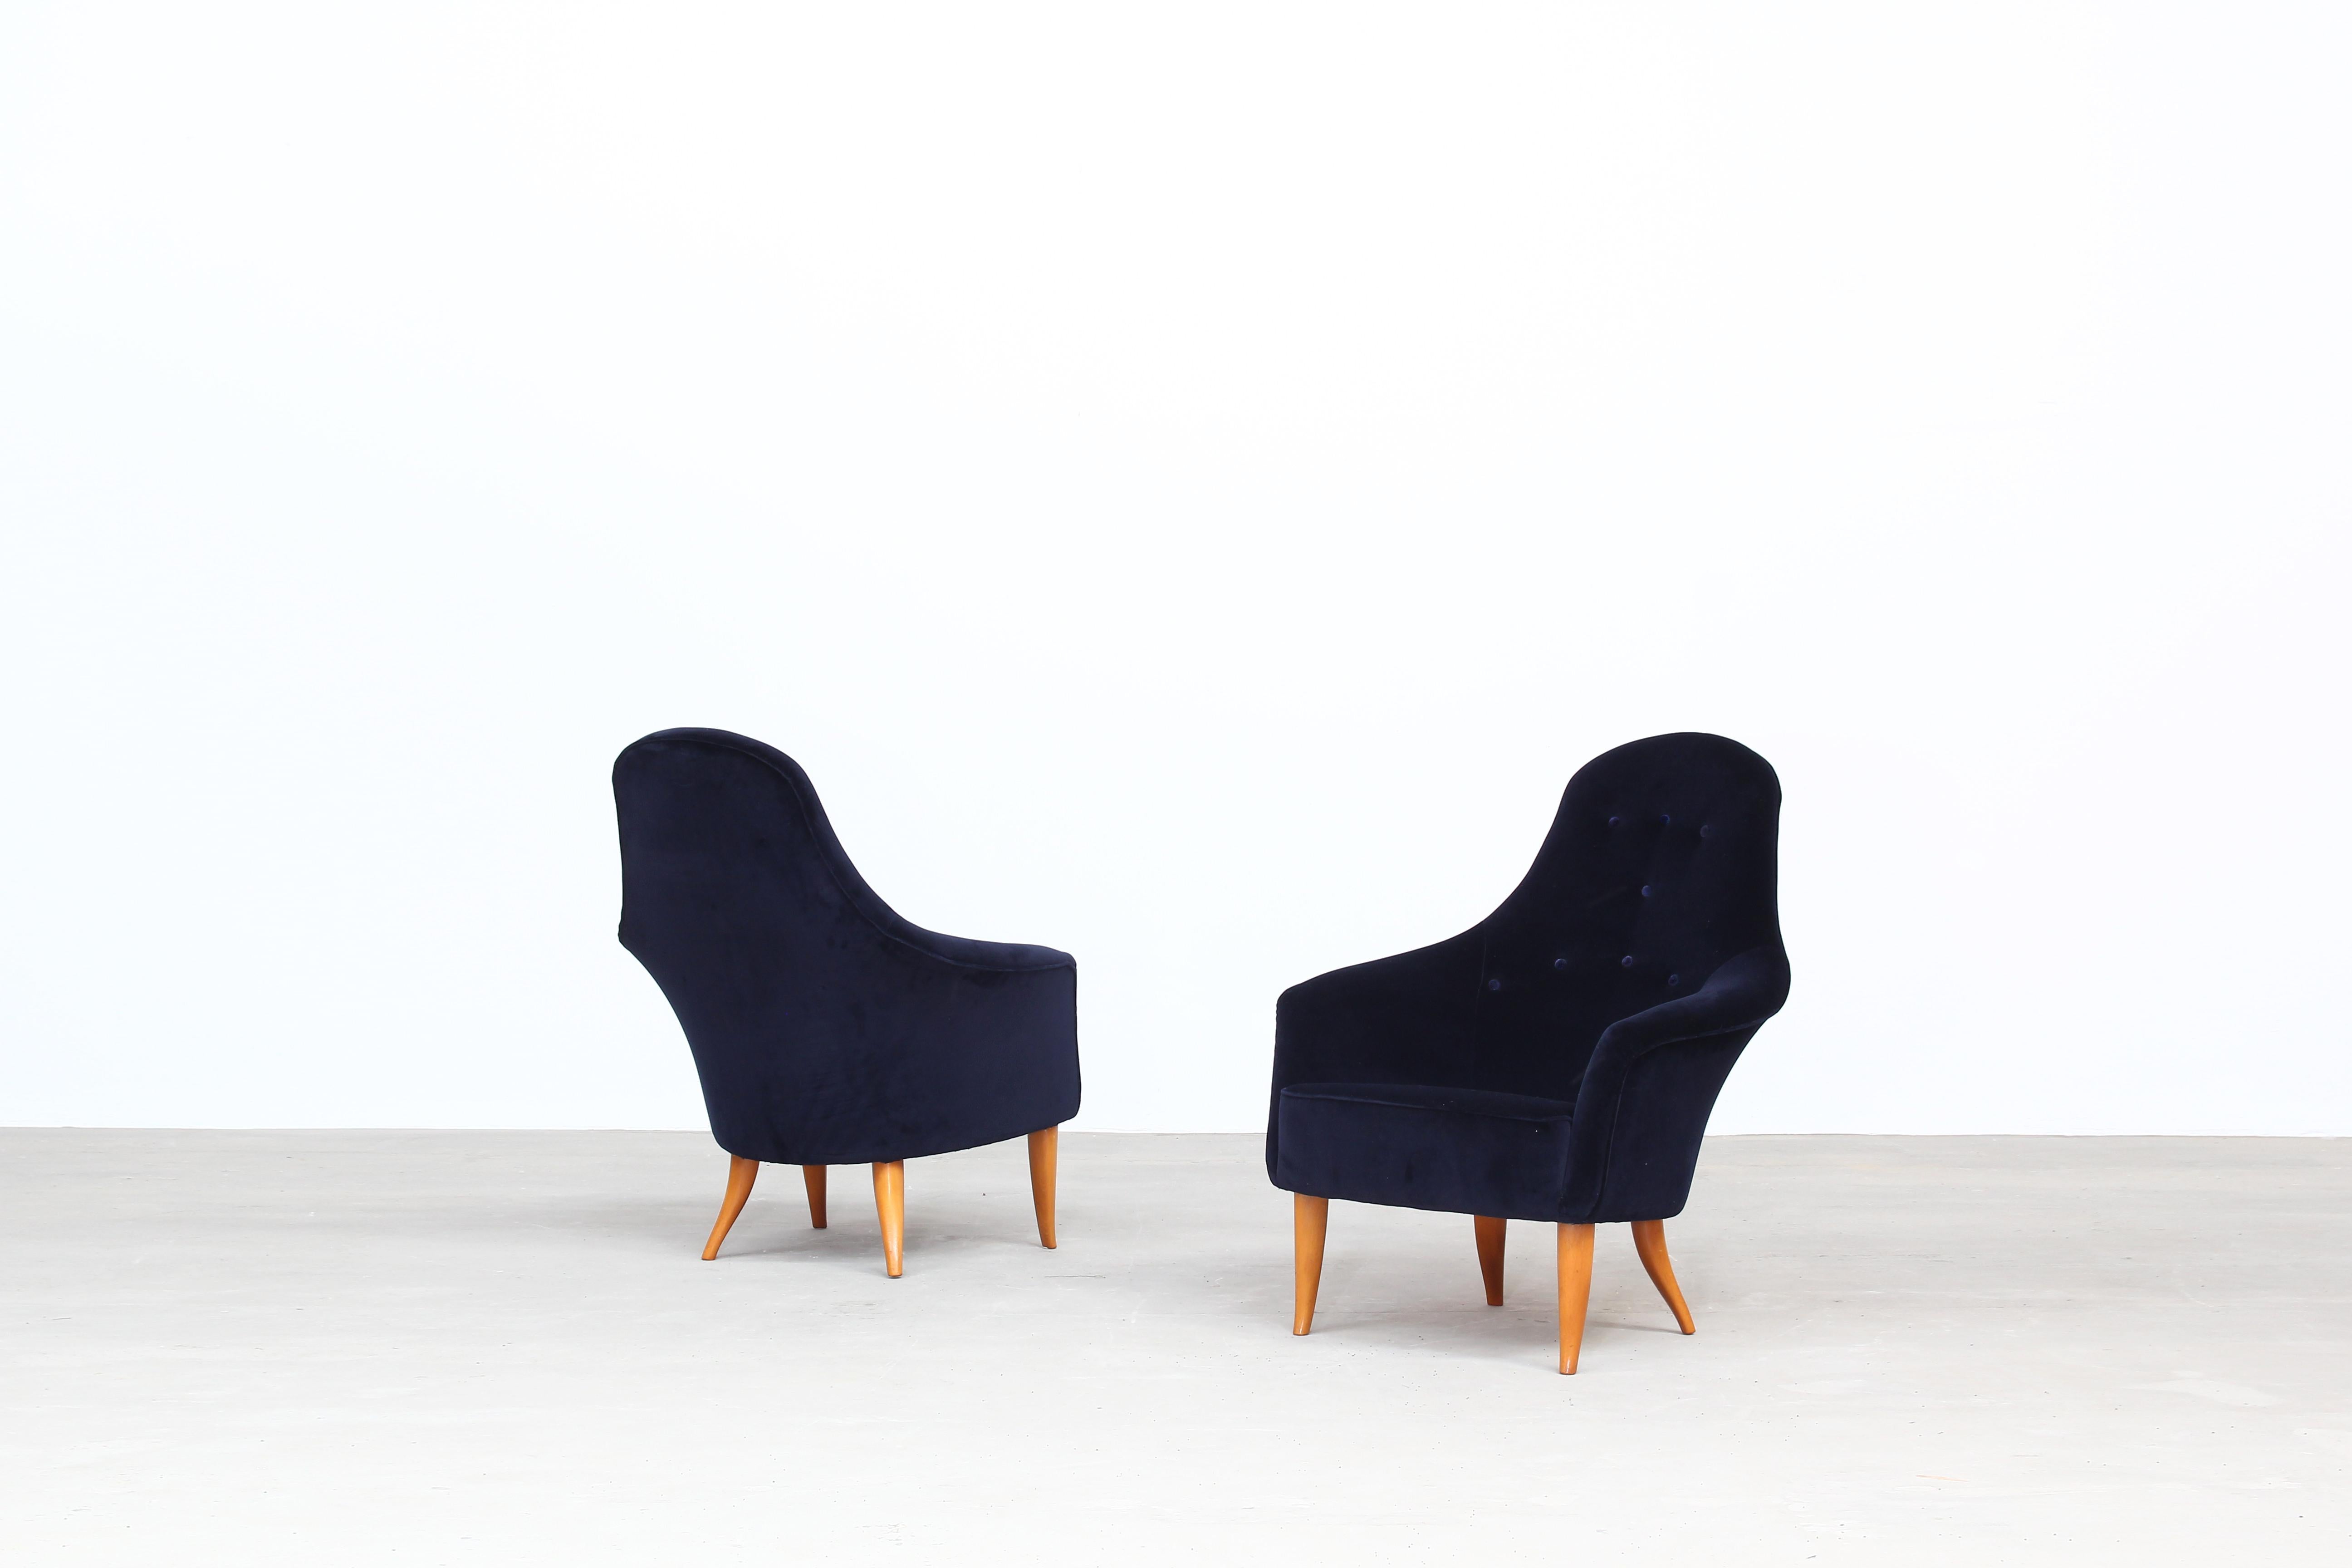 A pair of beautiful armchairs designed by Kerstin Holmquist is new upholstered with high-quality velvet.
The chairs come on beech legs and appears in an excellent condition. Manufactured by Nordiska Kompaniet Verkstader in the 1960s, made in Sweden.